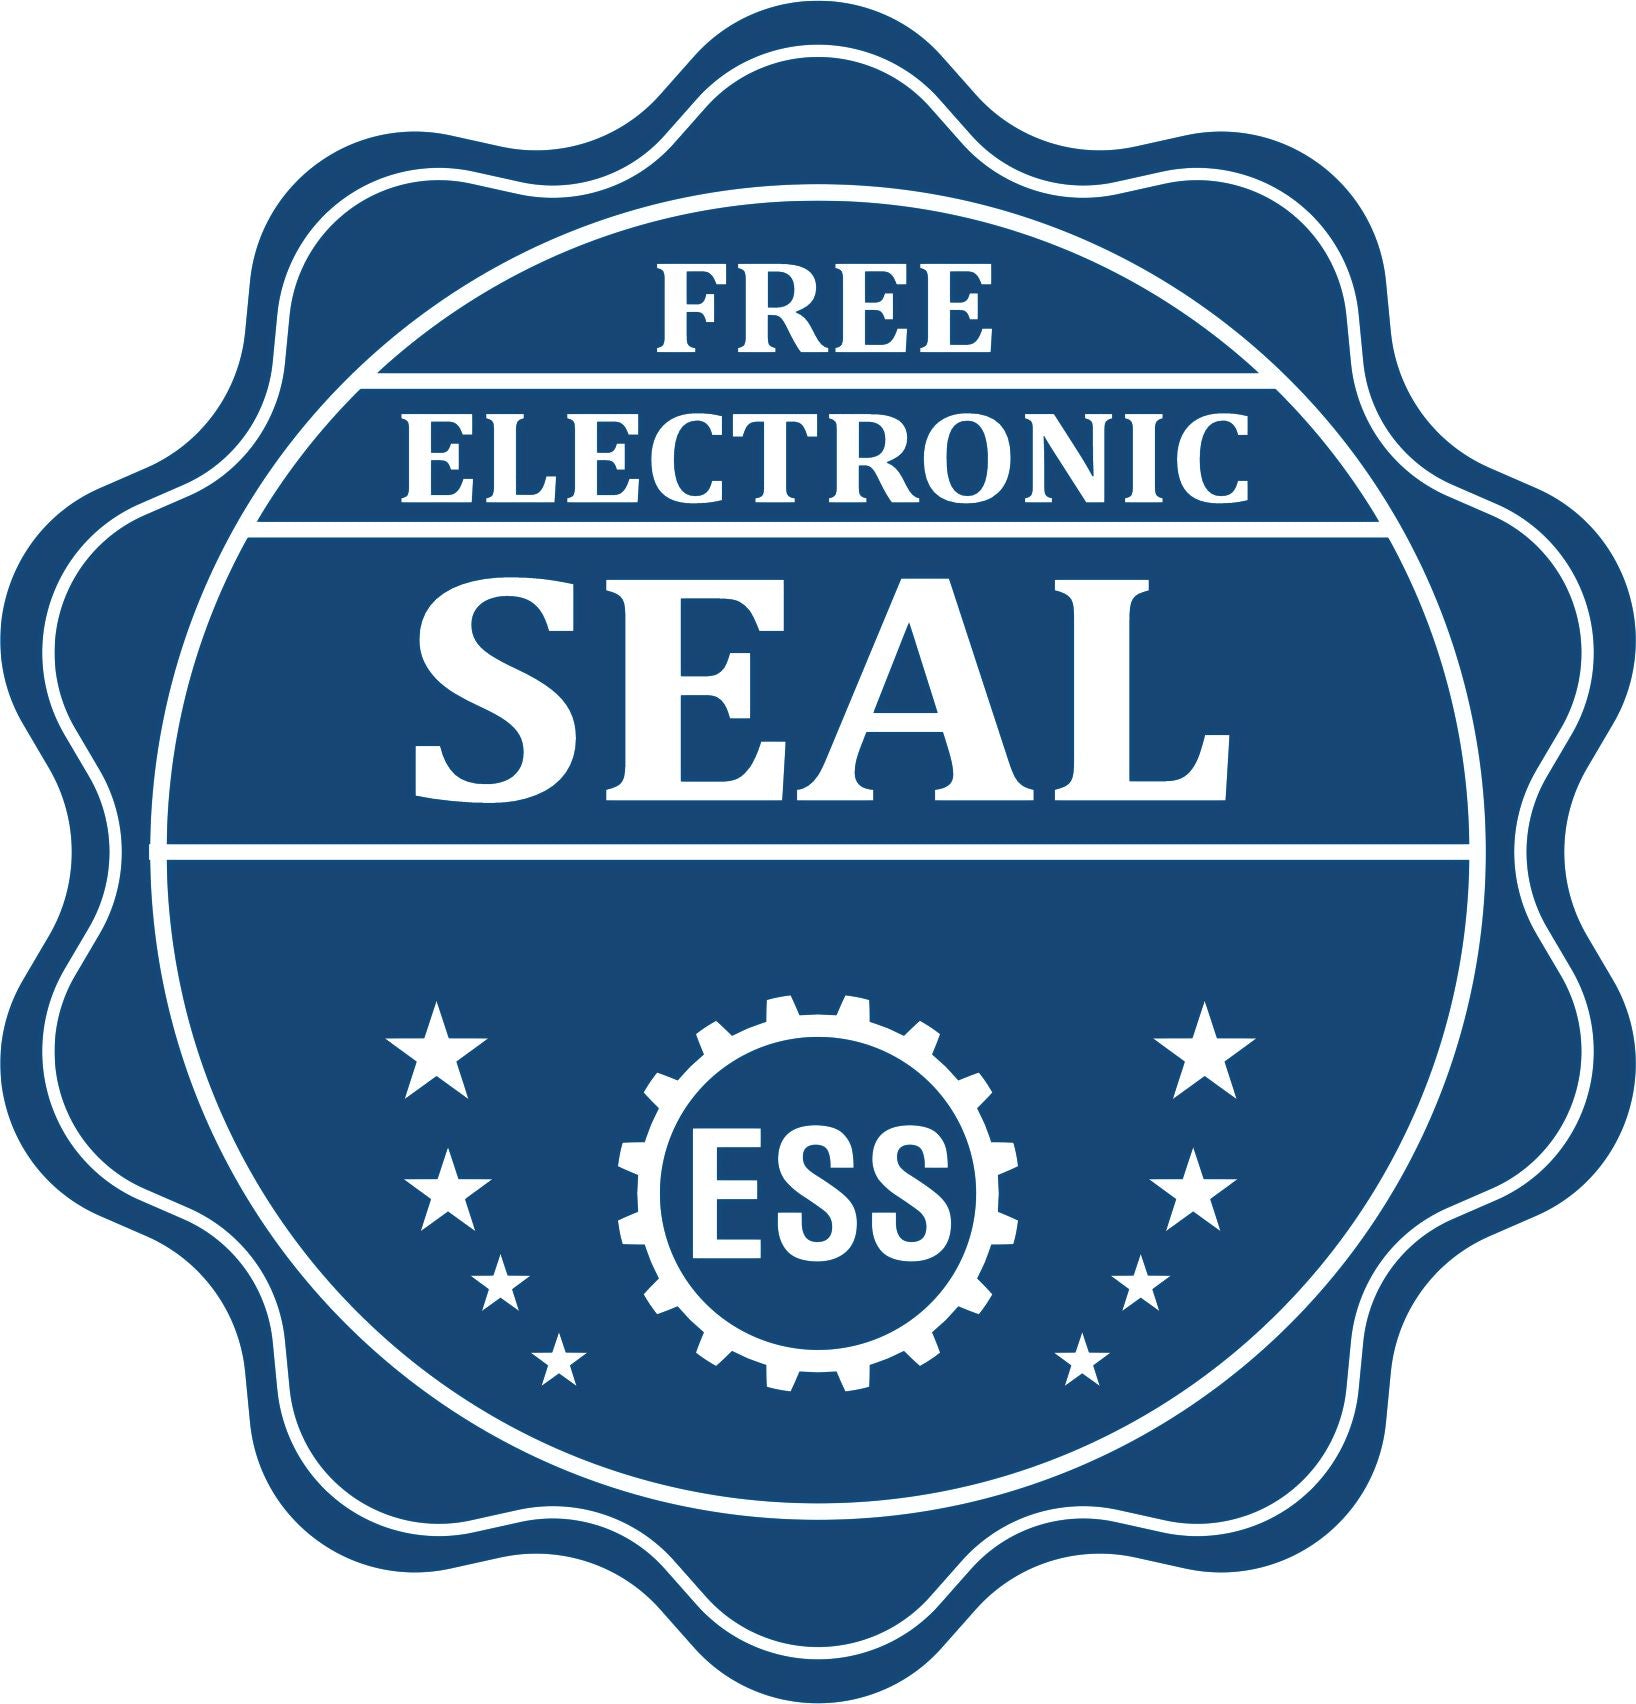 A badge showing a free electronic seal for the Super Slim Virginia Notary Public Stamp with stars and the ESS gear on the emblem.